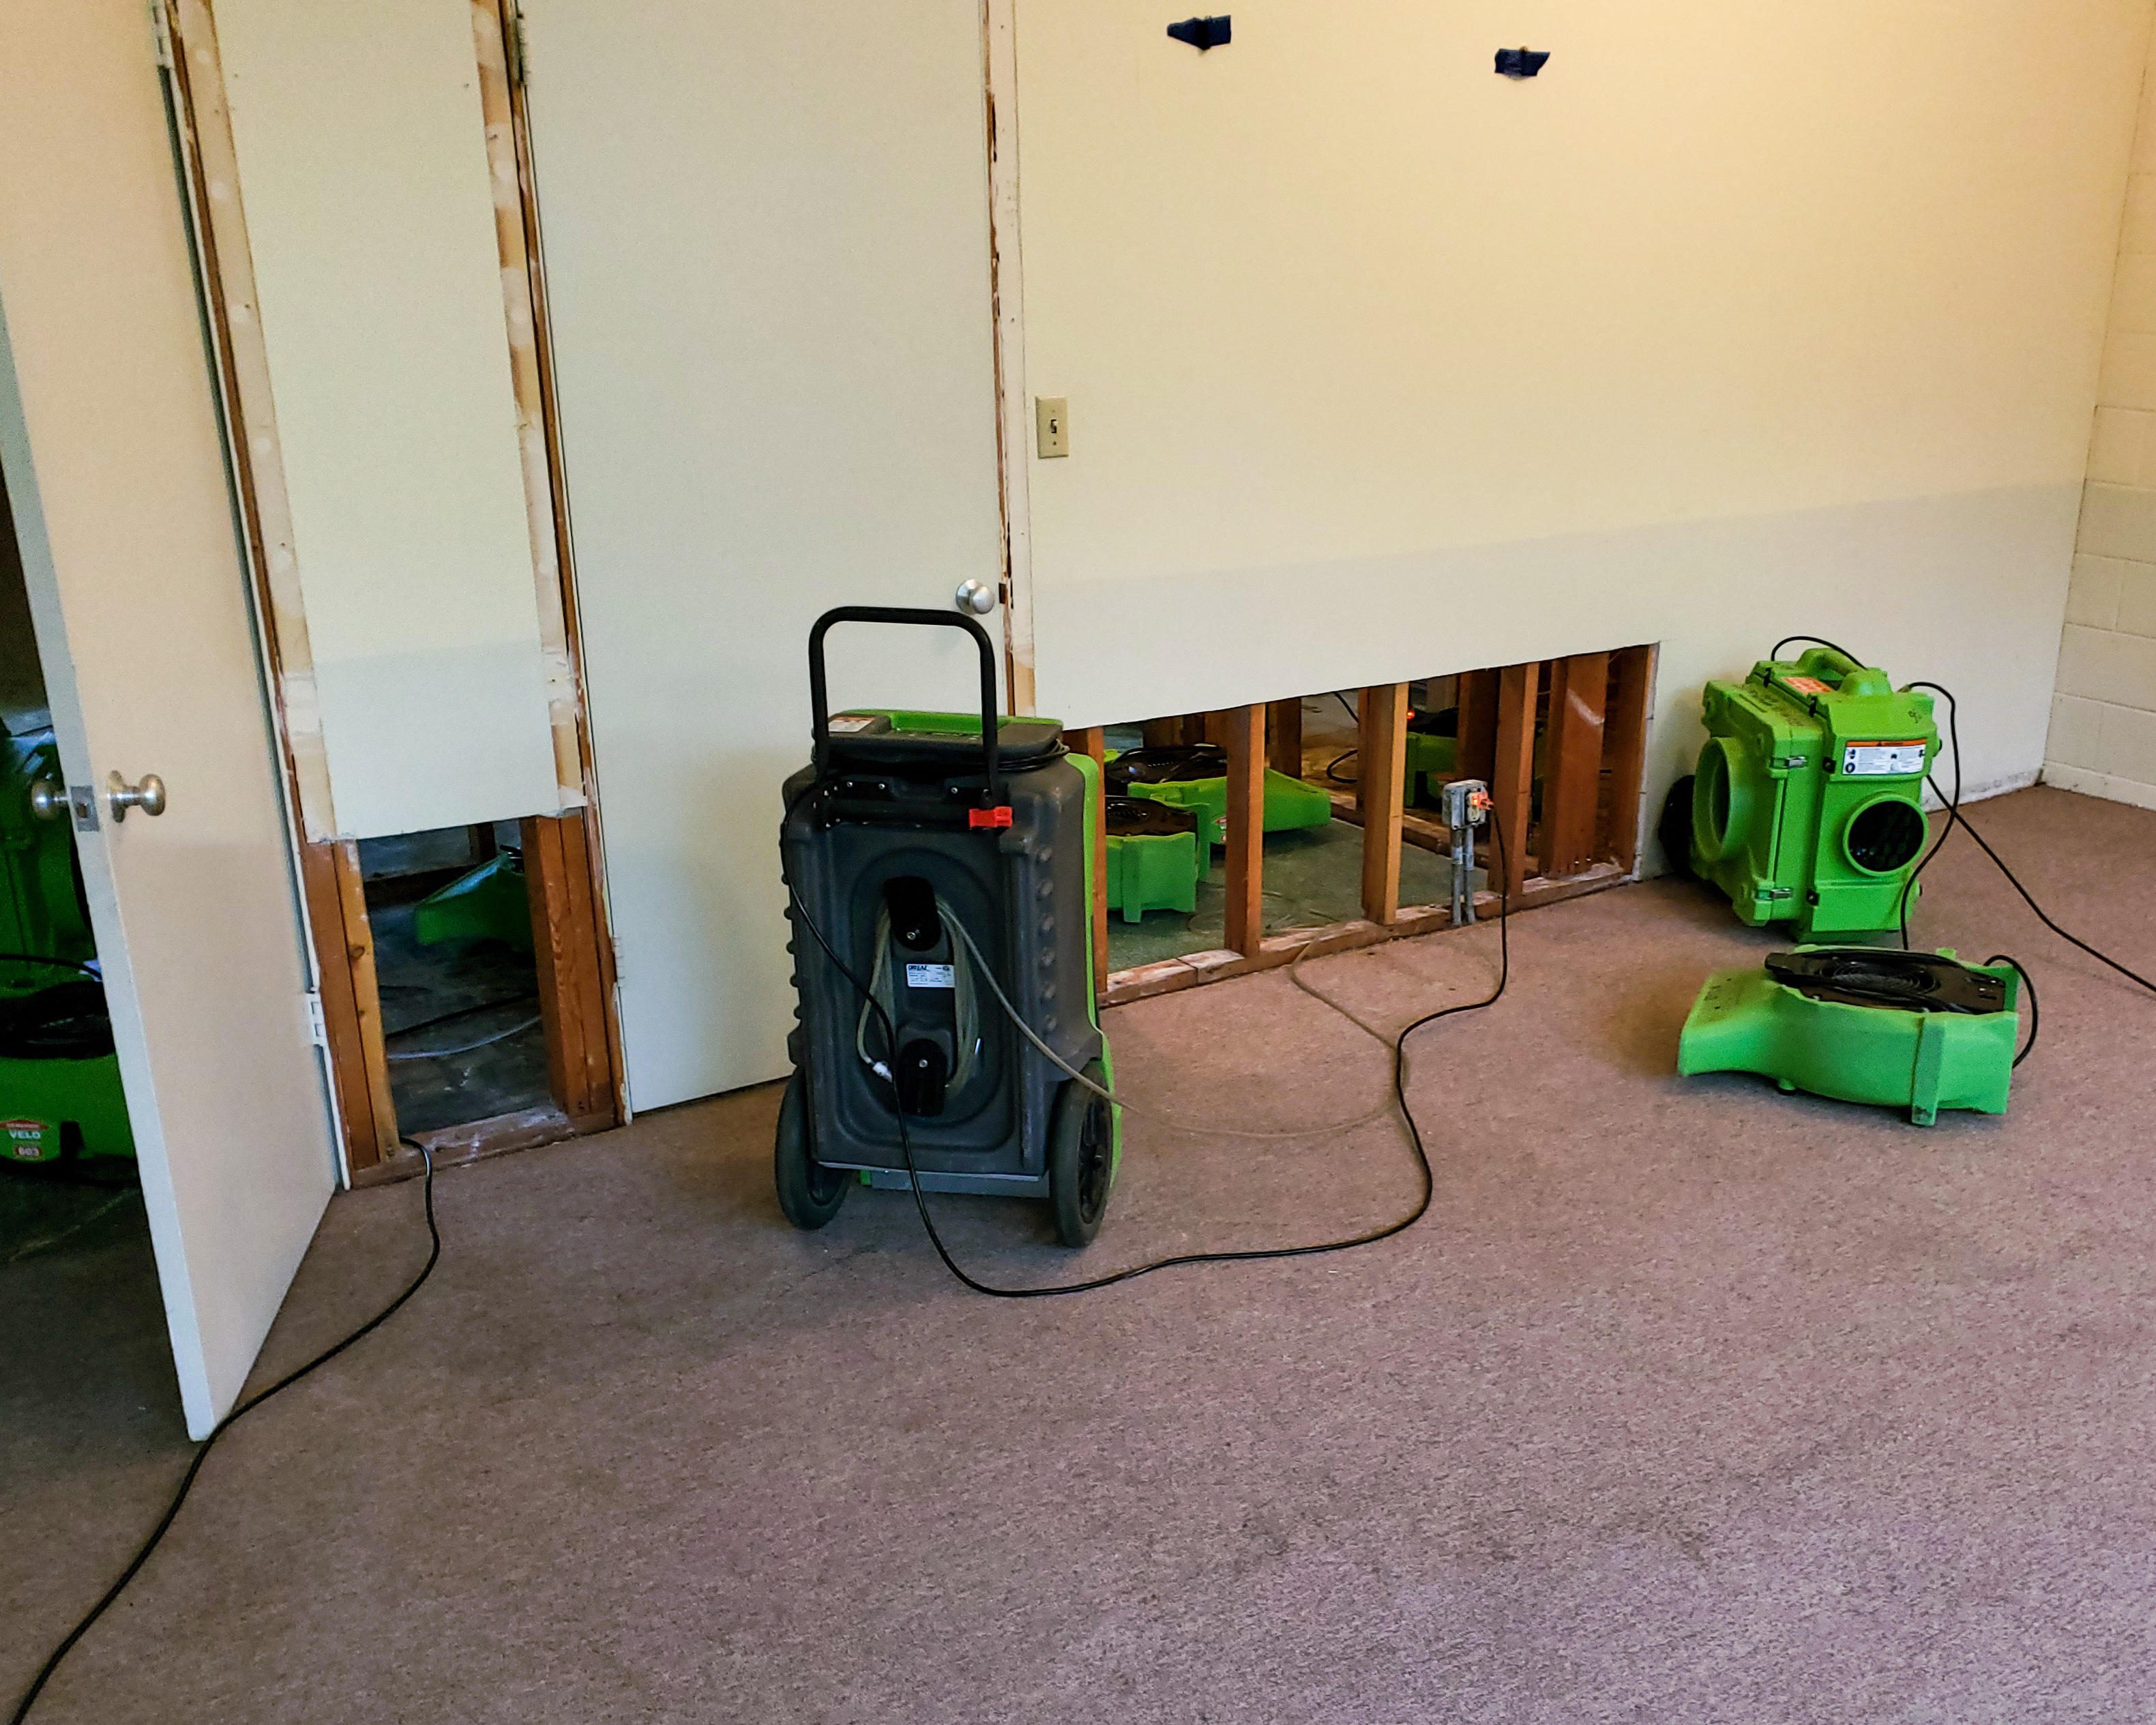 SERVPRO of Shoreline/Woodinville will swiftly and efficiently restore your residential or commercial property to its pre-loss state. Water damage emergency services are available 24 hours a day, seven days a week.